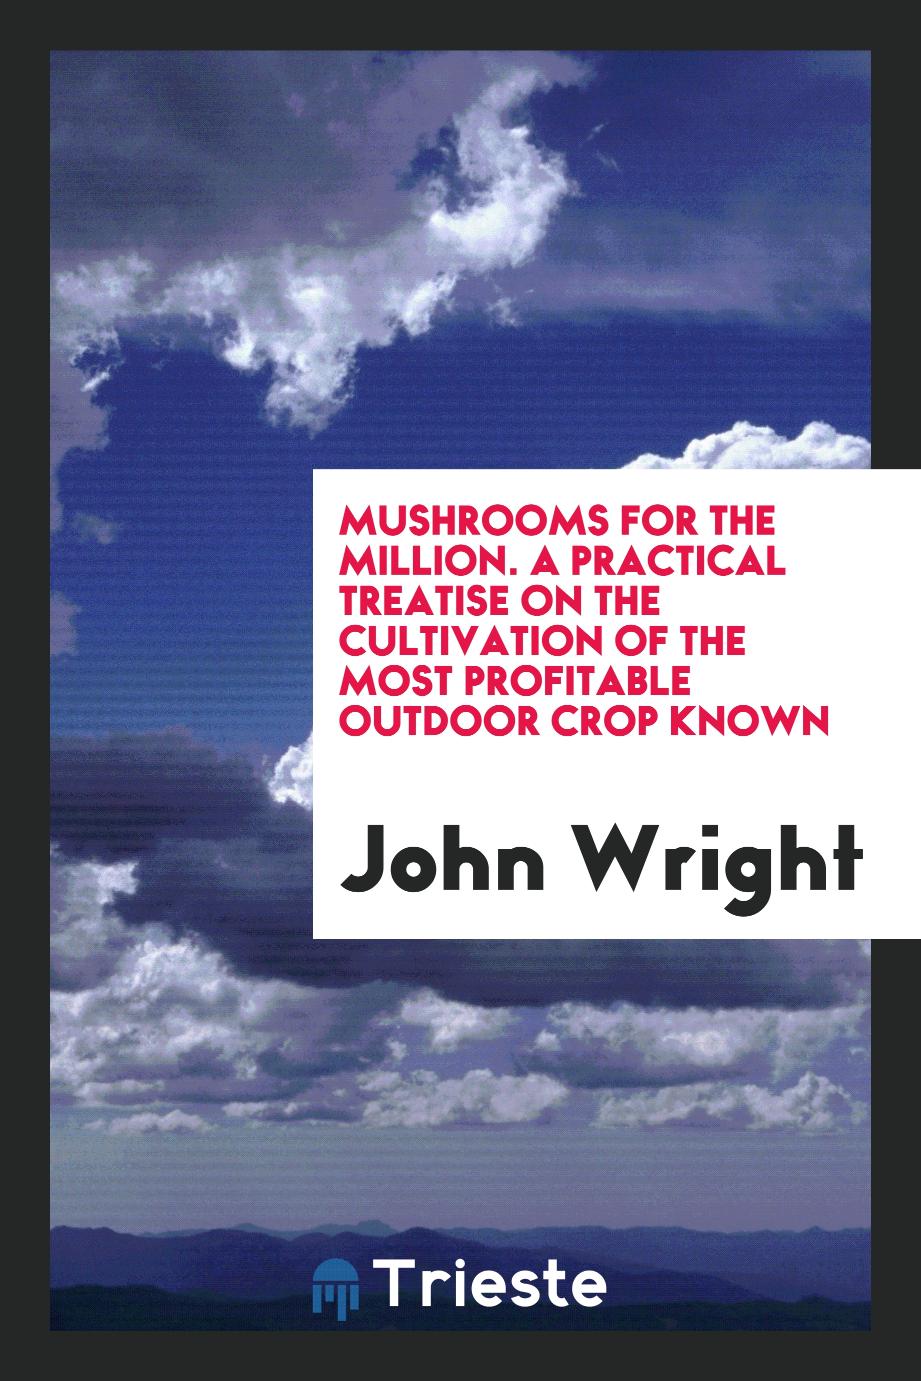 Mushrooms for the Million. A Practical Treatise on the Cultivation of the Most Profitable Outdoor Crop Known